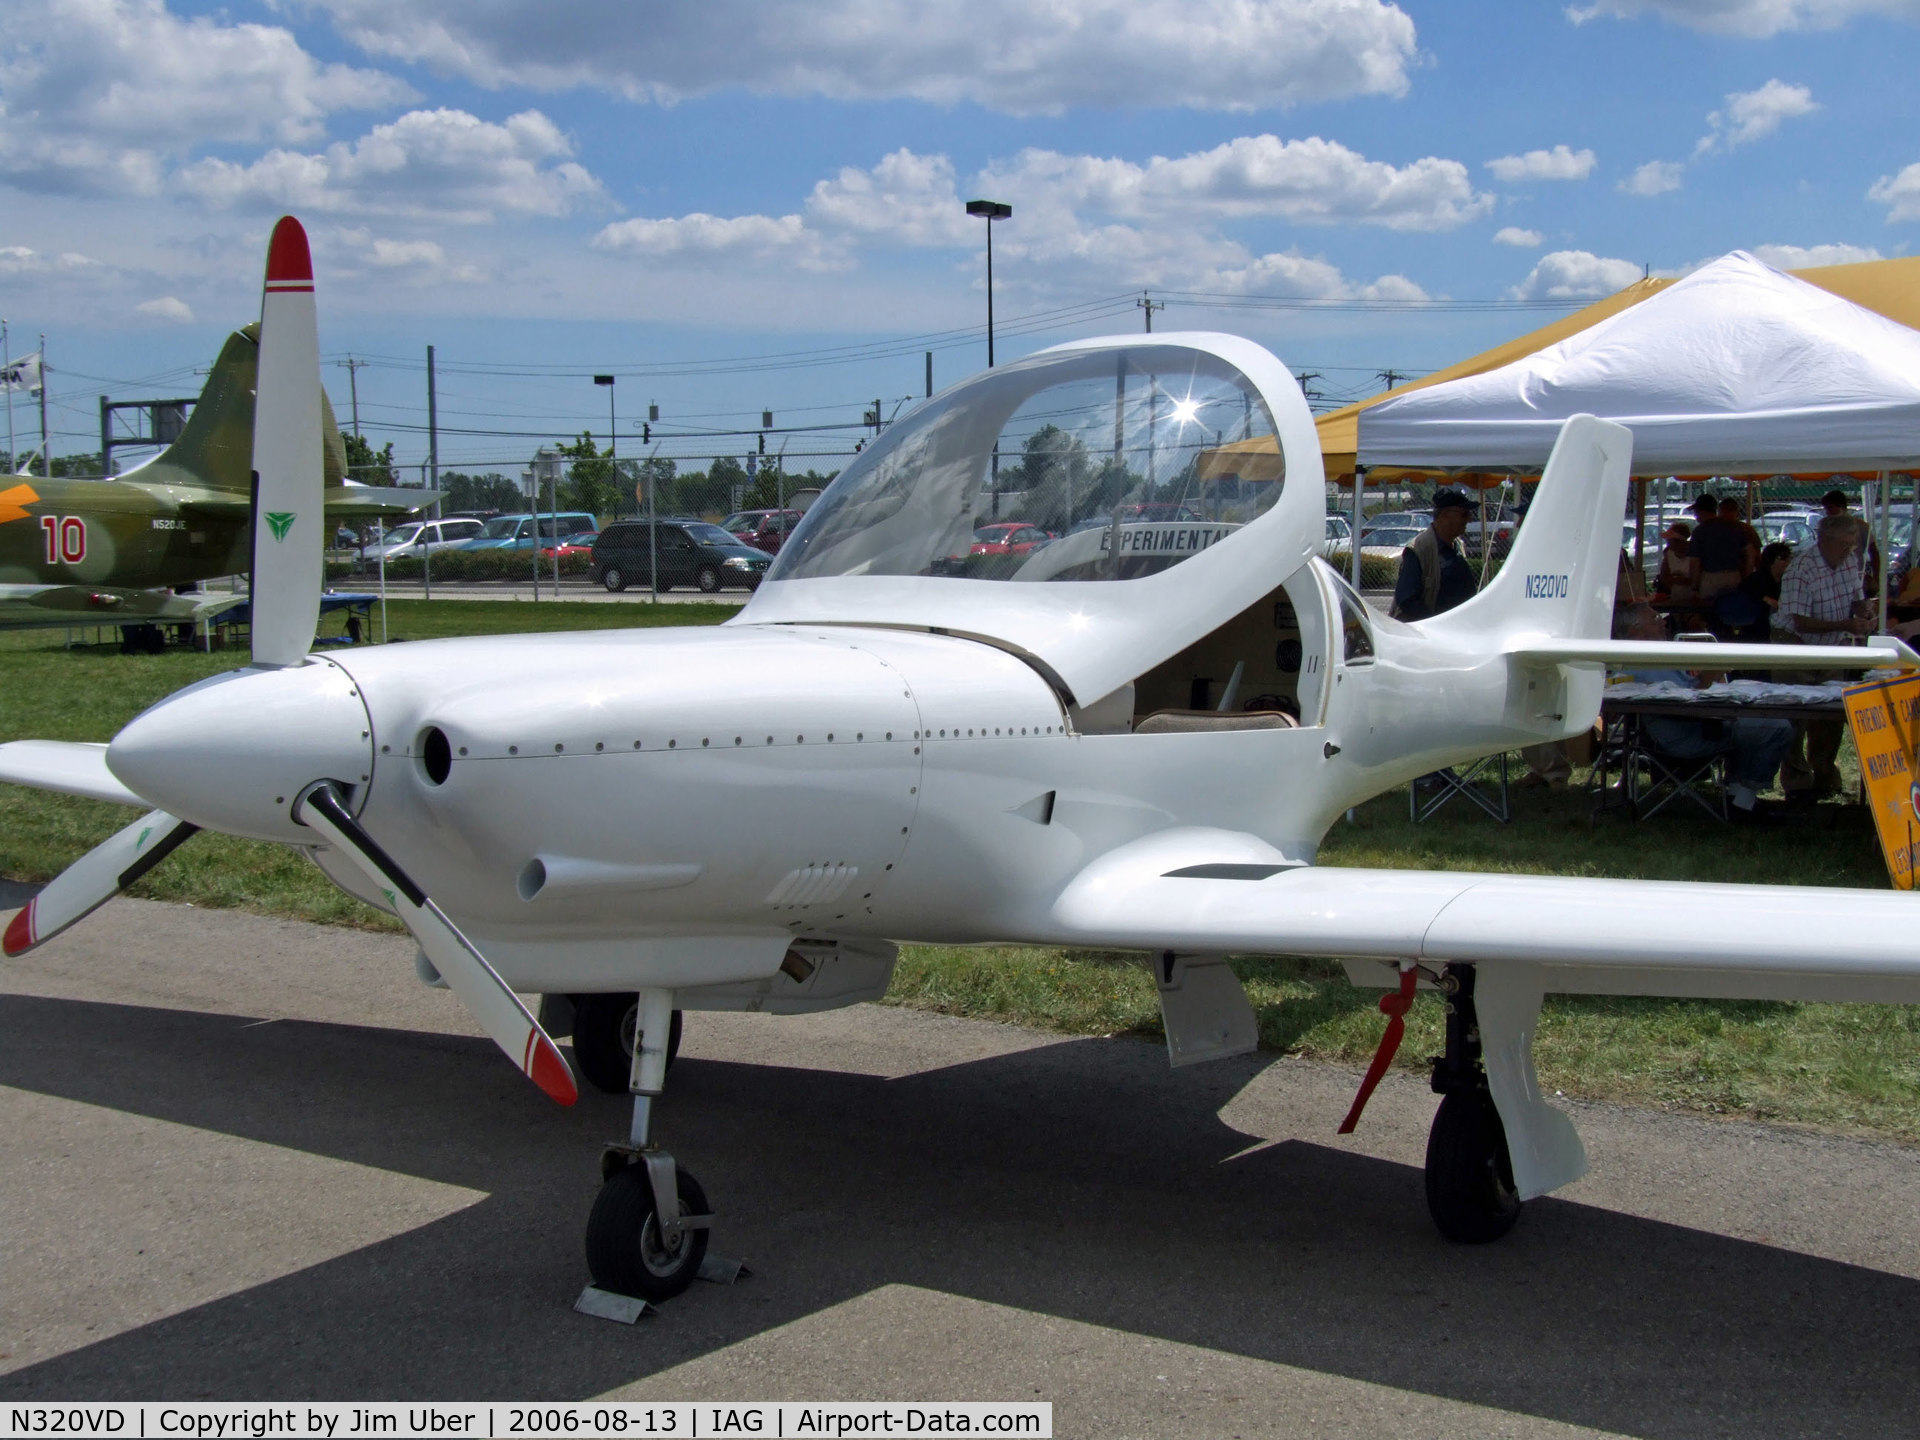 N320VD, 2000 Lancair 320 C/N 859-320-701, Vince's pristine Lancair on display at a Museum benefit at the Airport